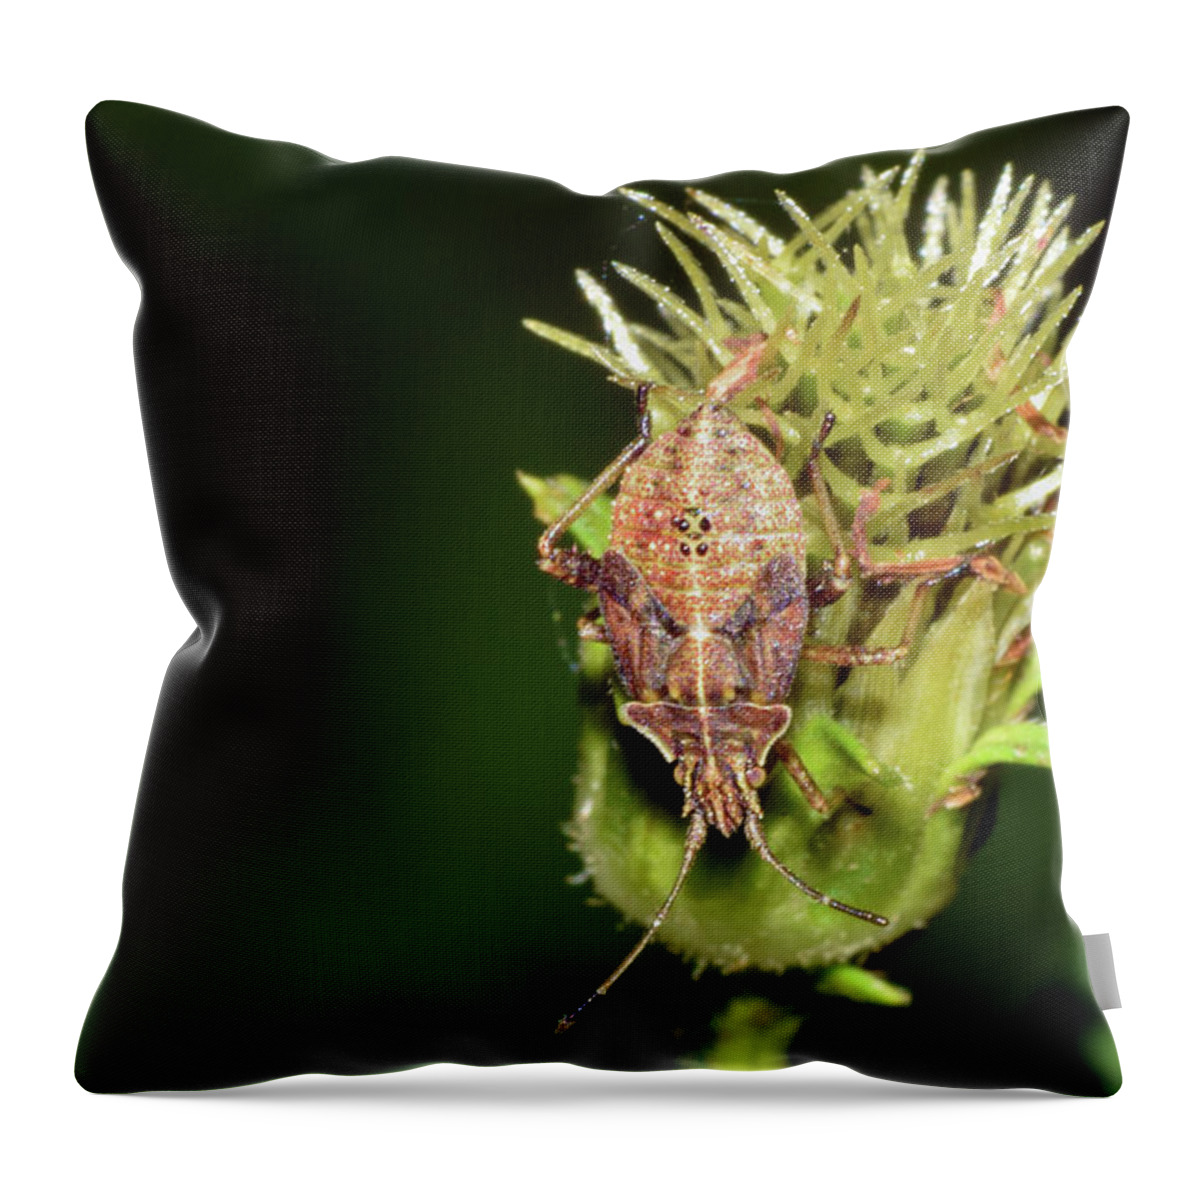 Photograph Throw Pillow featuring the photograph Leaf Footed Bug Nymph by Larah McElroy